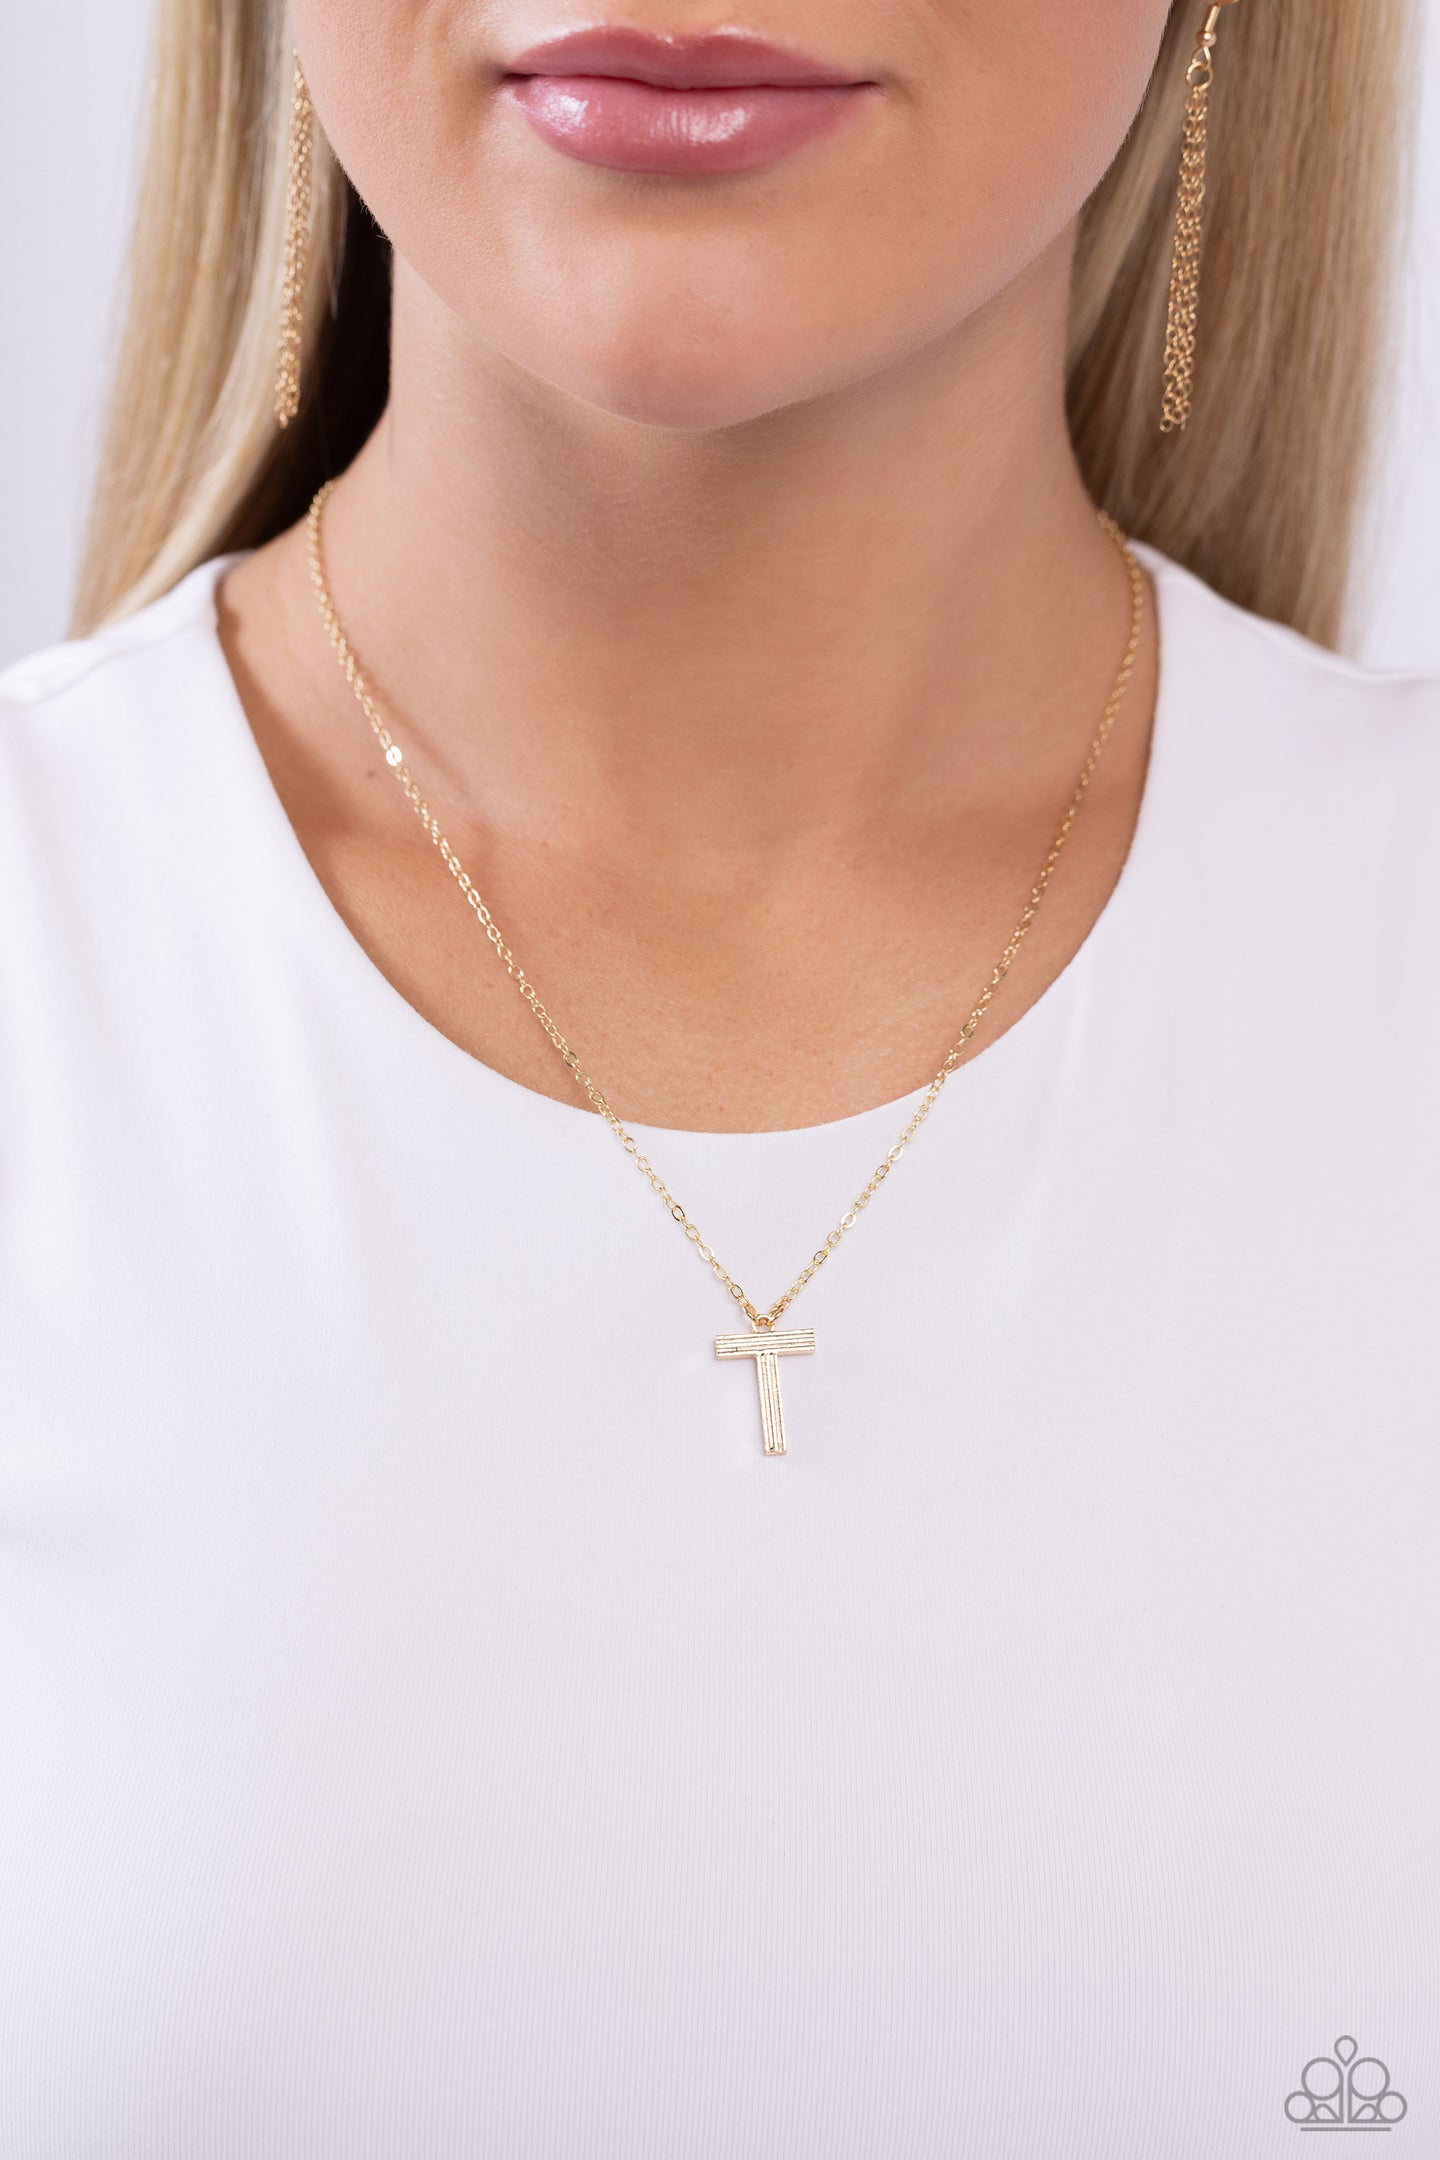 Leave Your Initials - Gold - T necklace